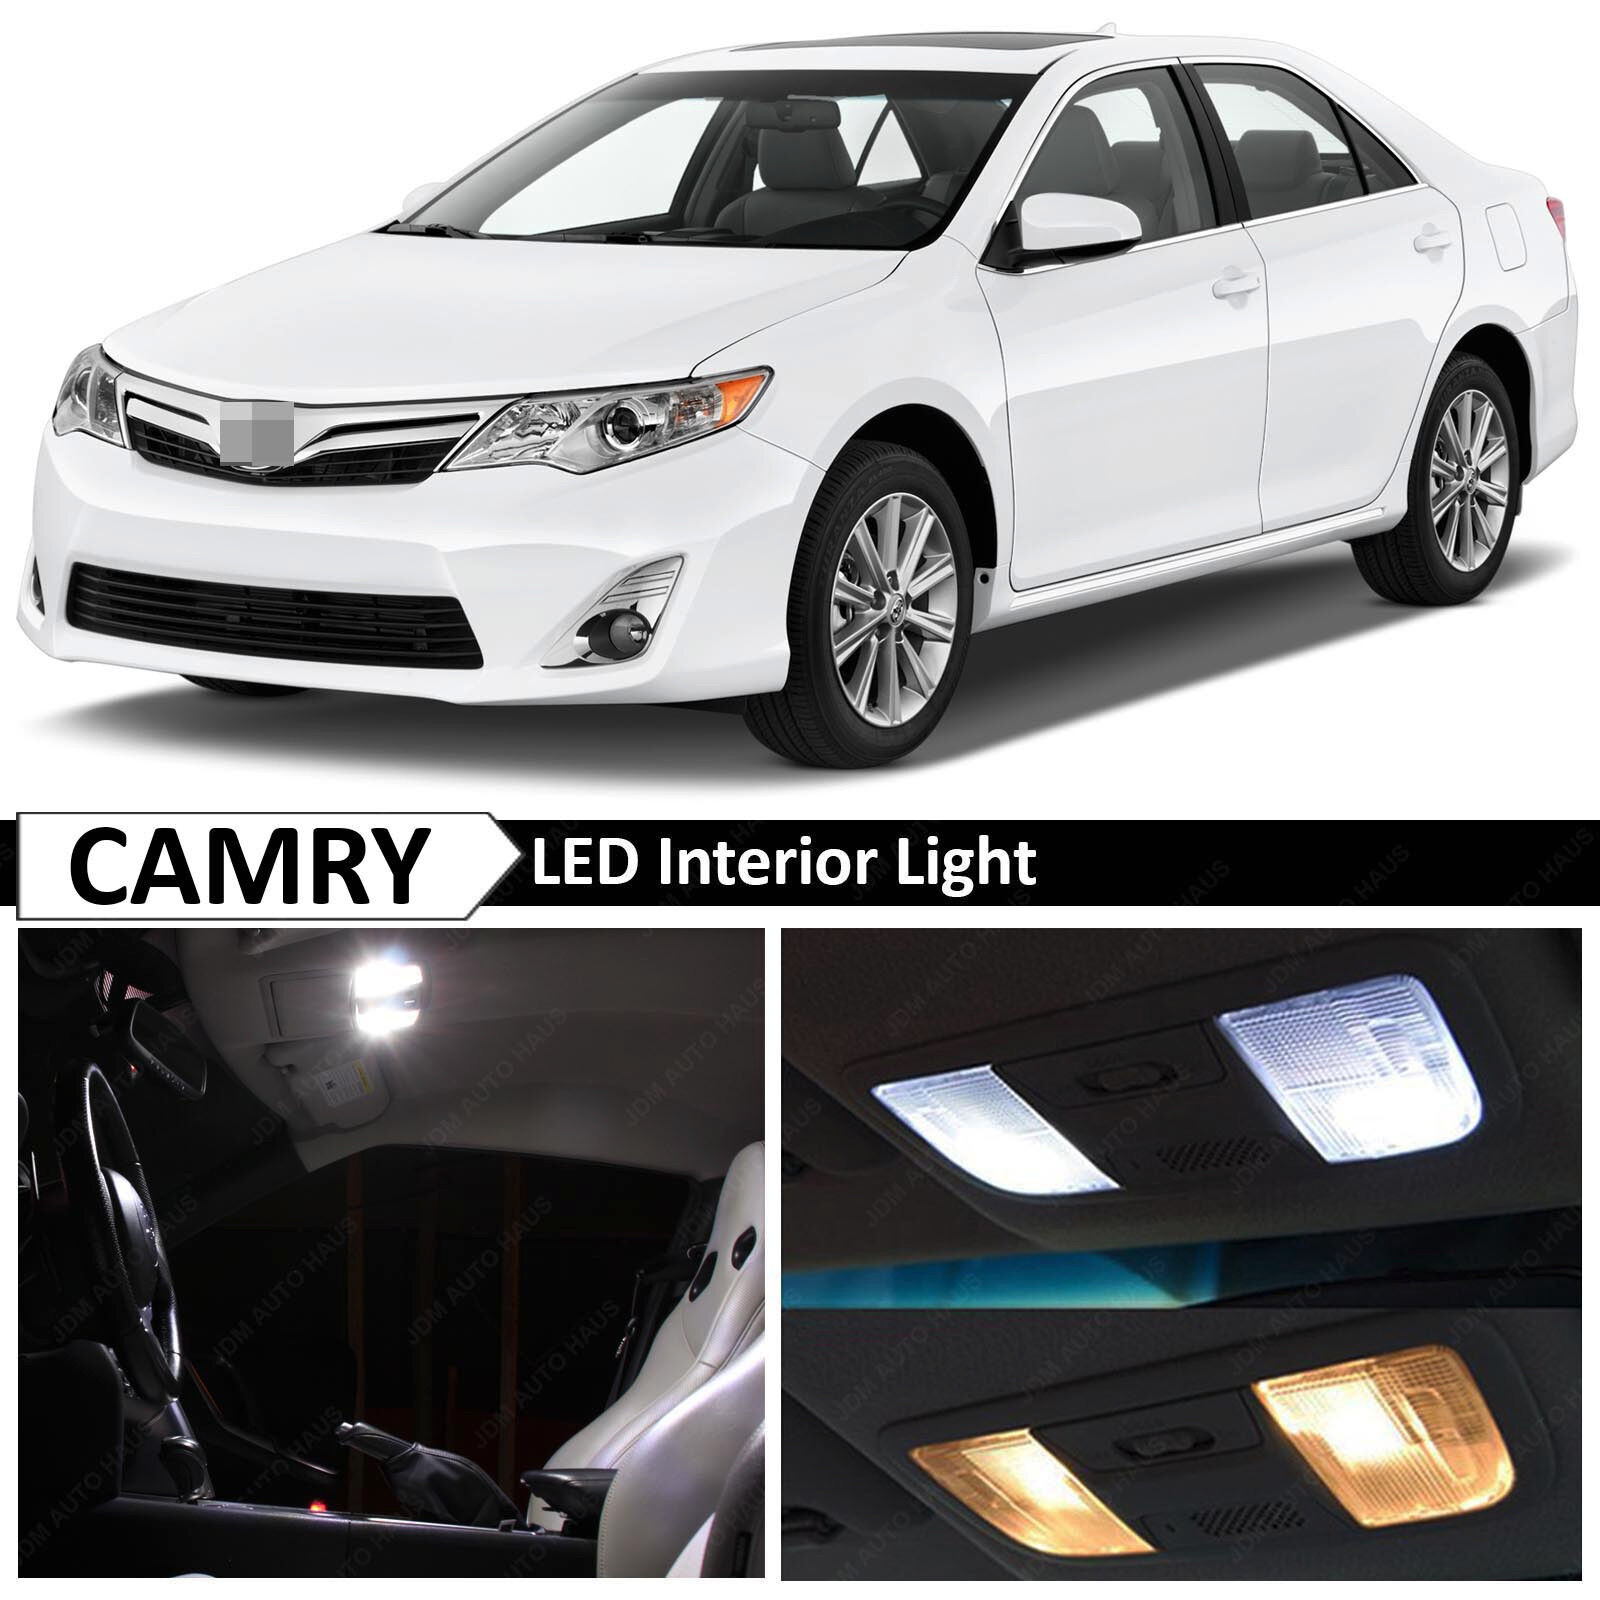 14x White Interior Map Dome LED Lights Package kit Fits Toyota Camry 2012-2018